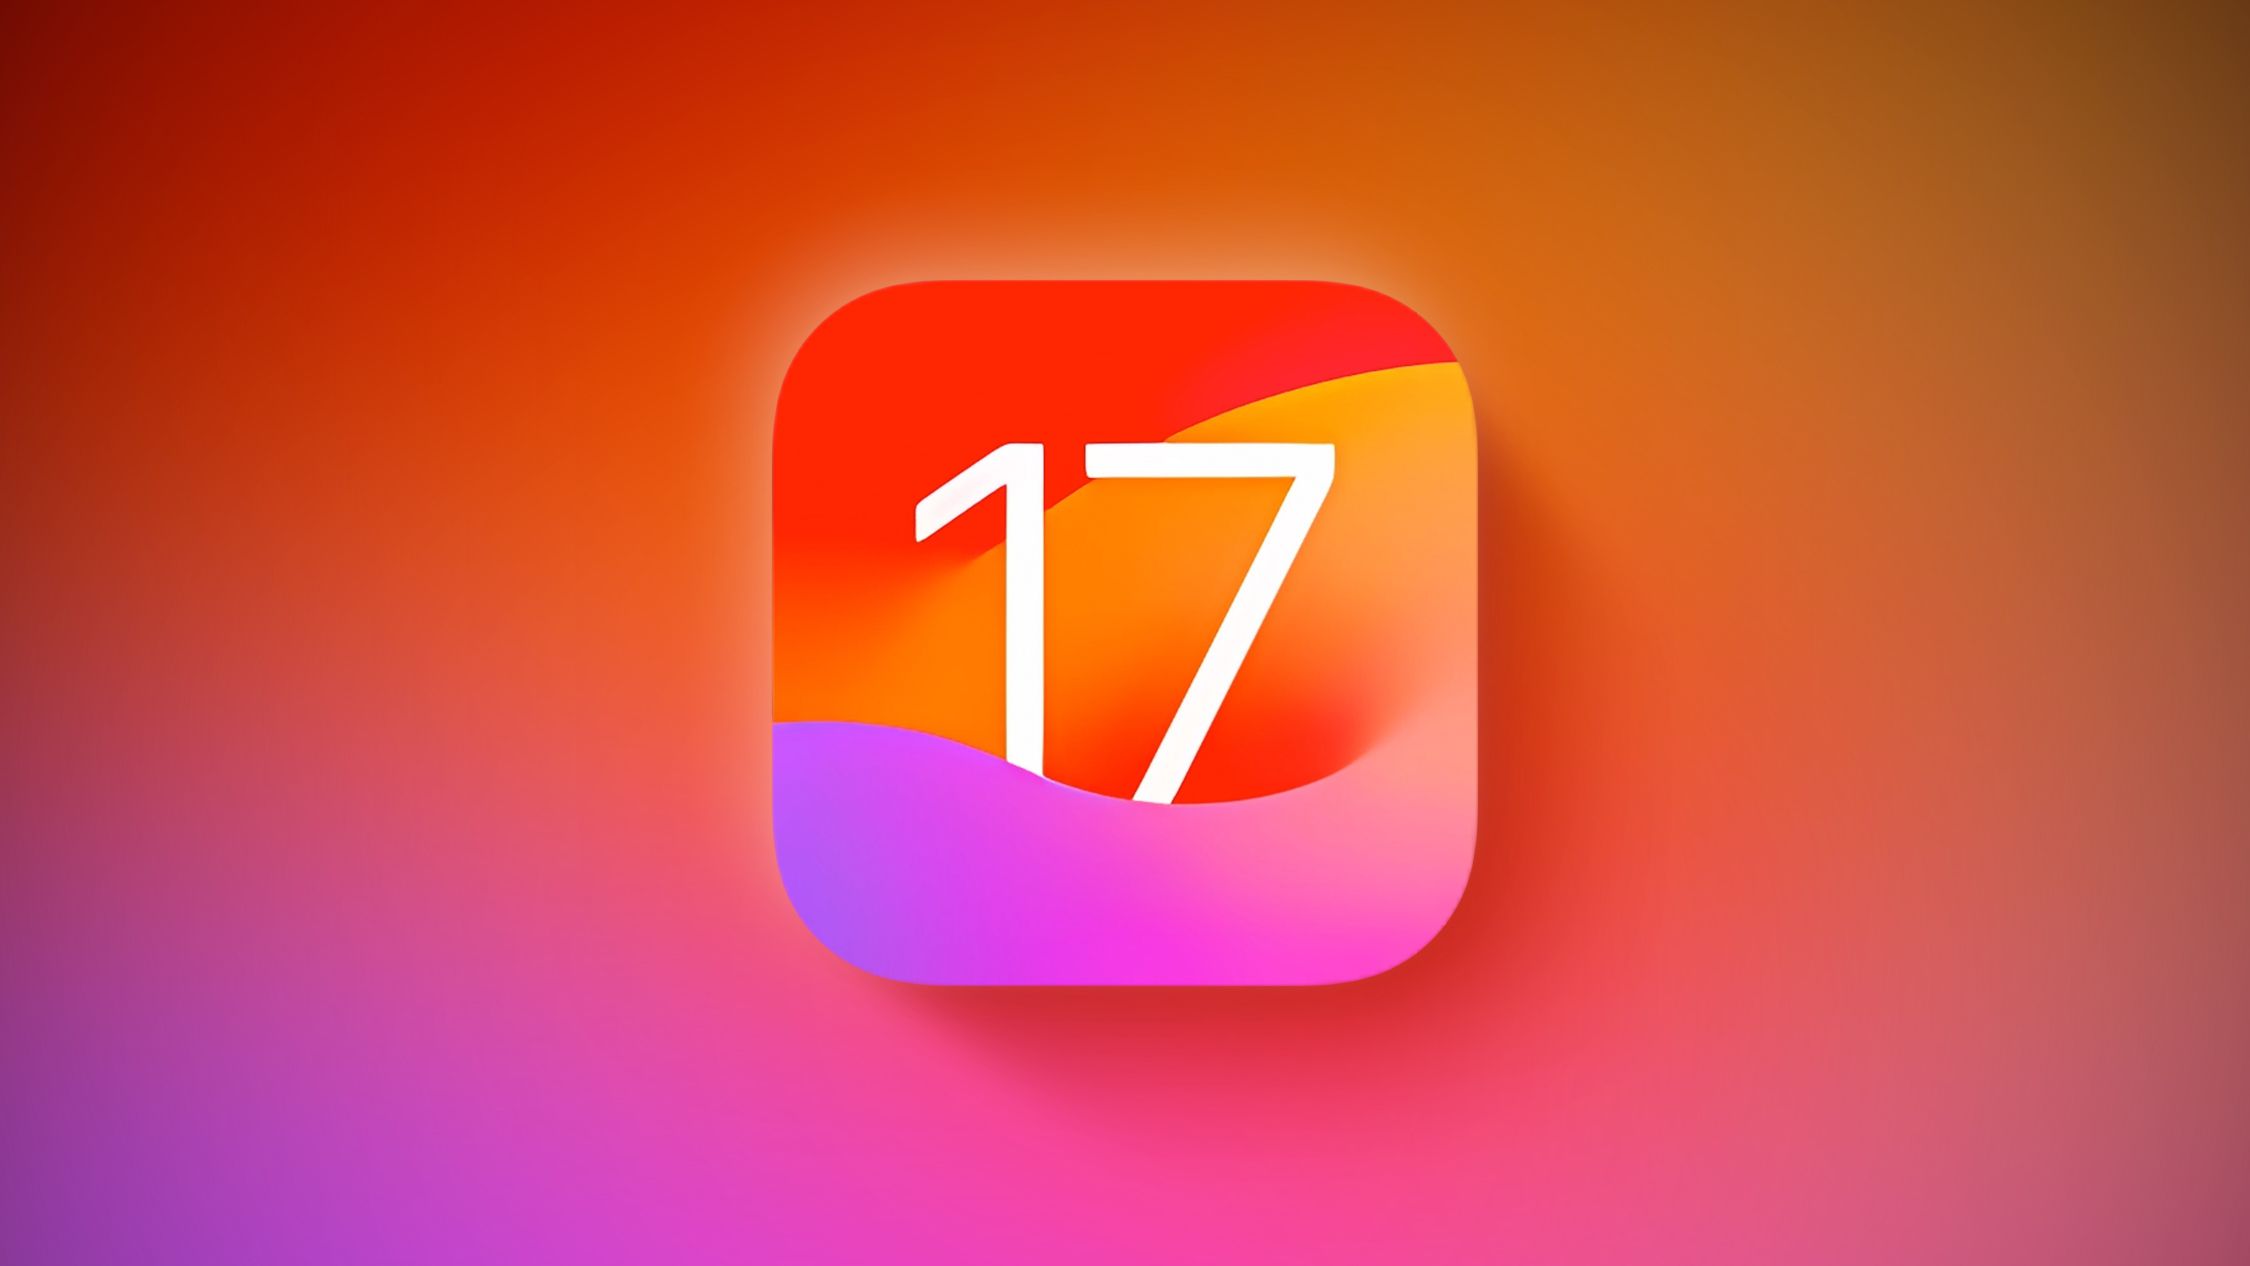 Apple iOS 17 Has Arrived: What Does It Mean For Your Business?